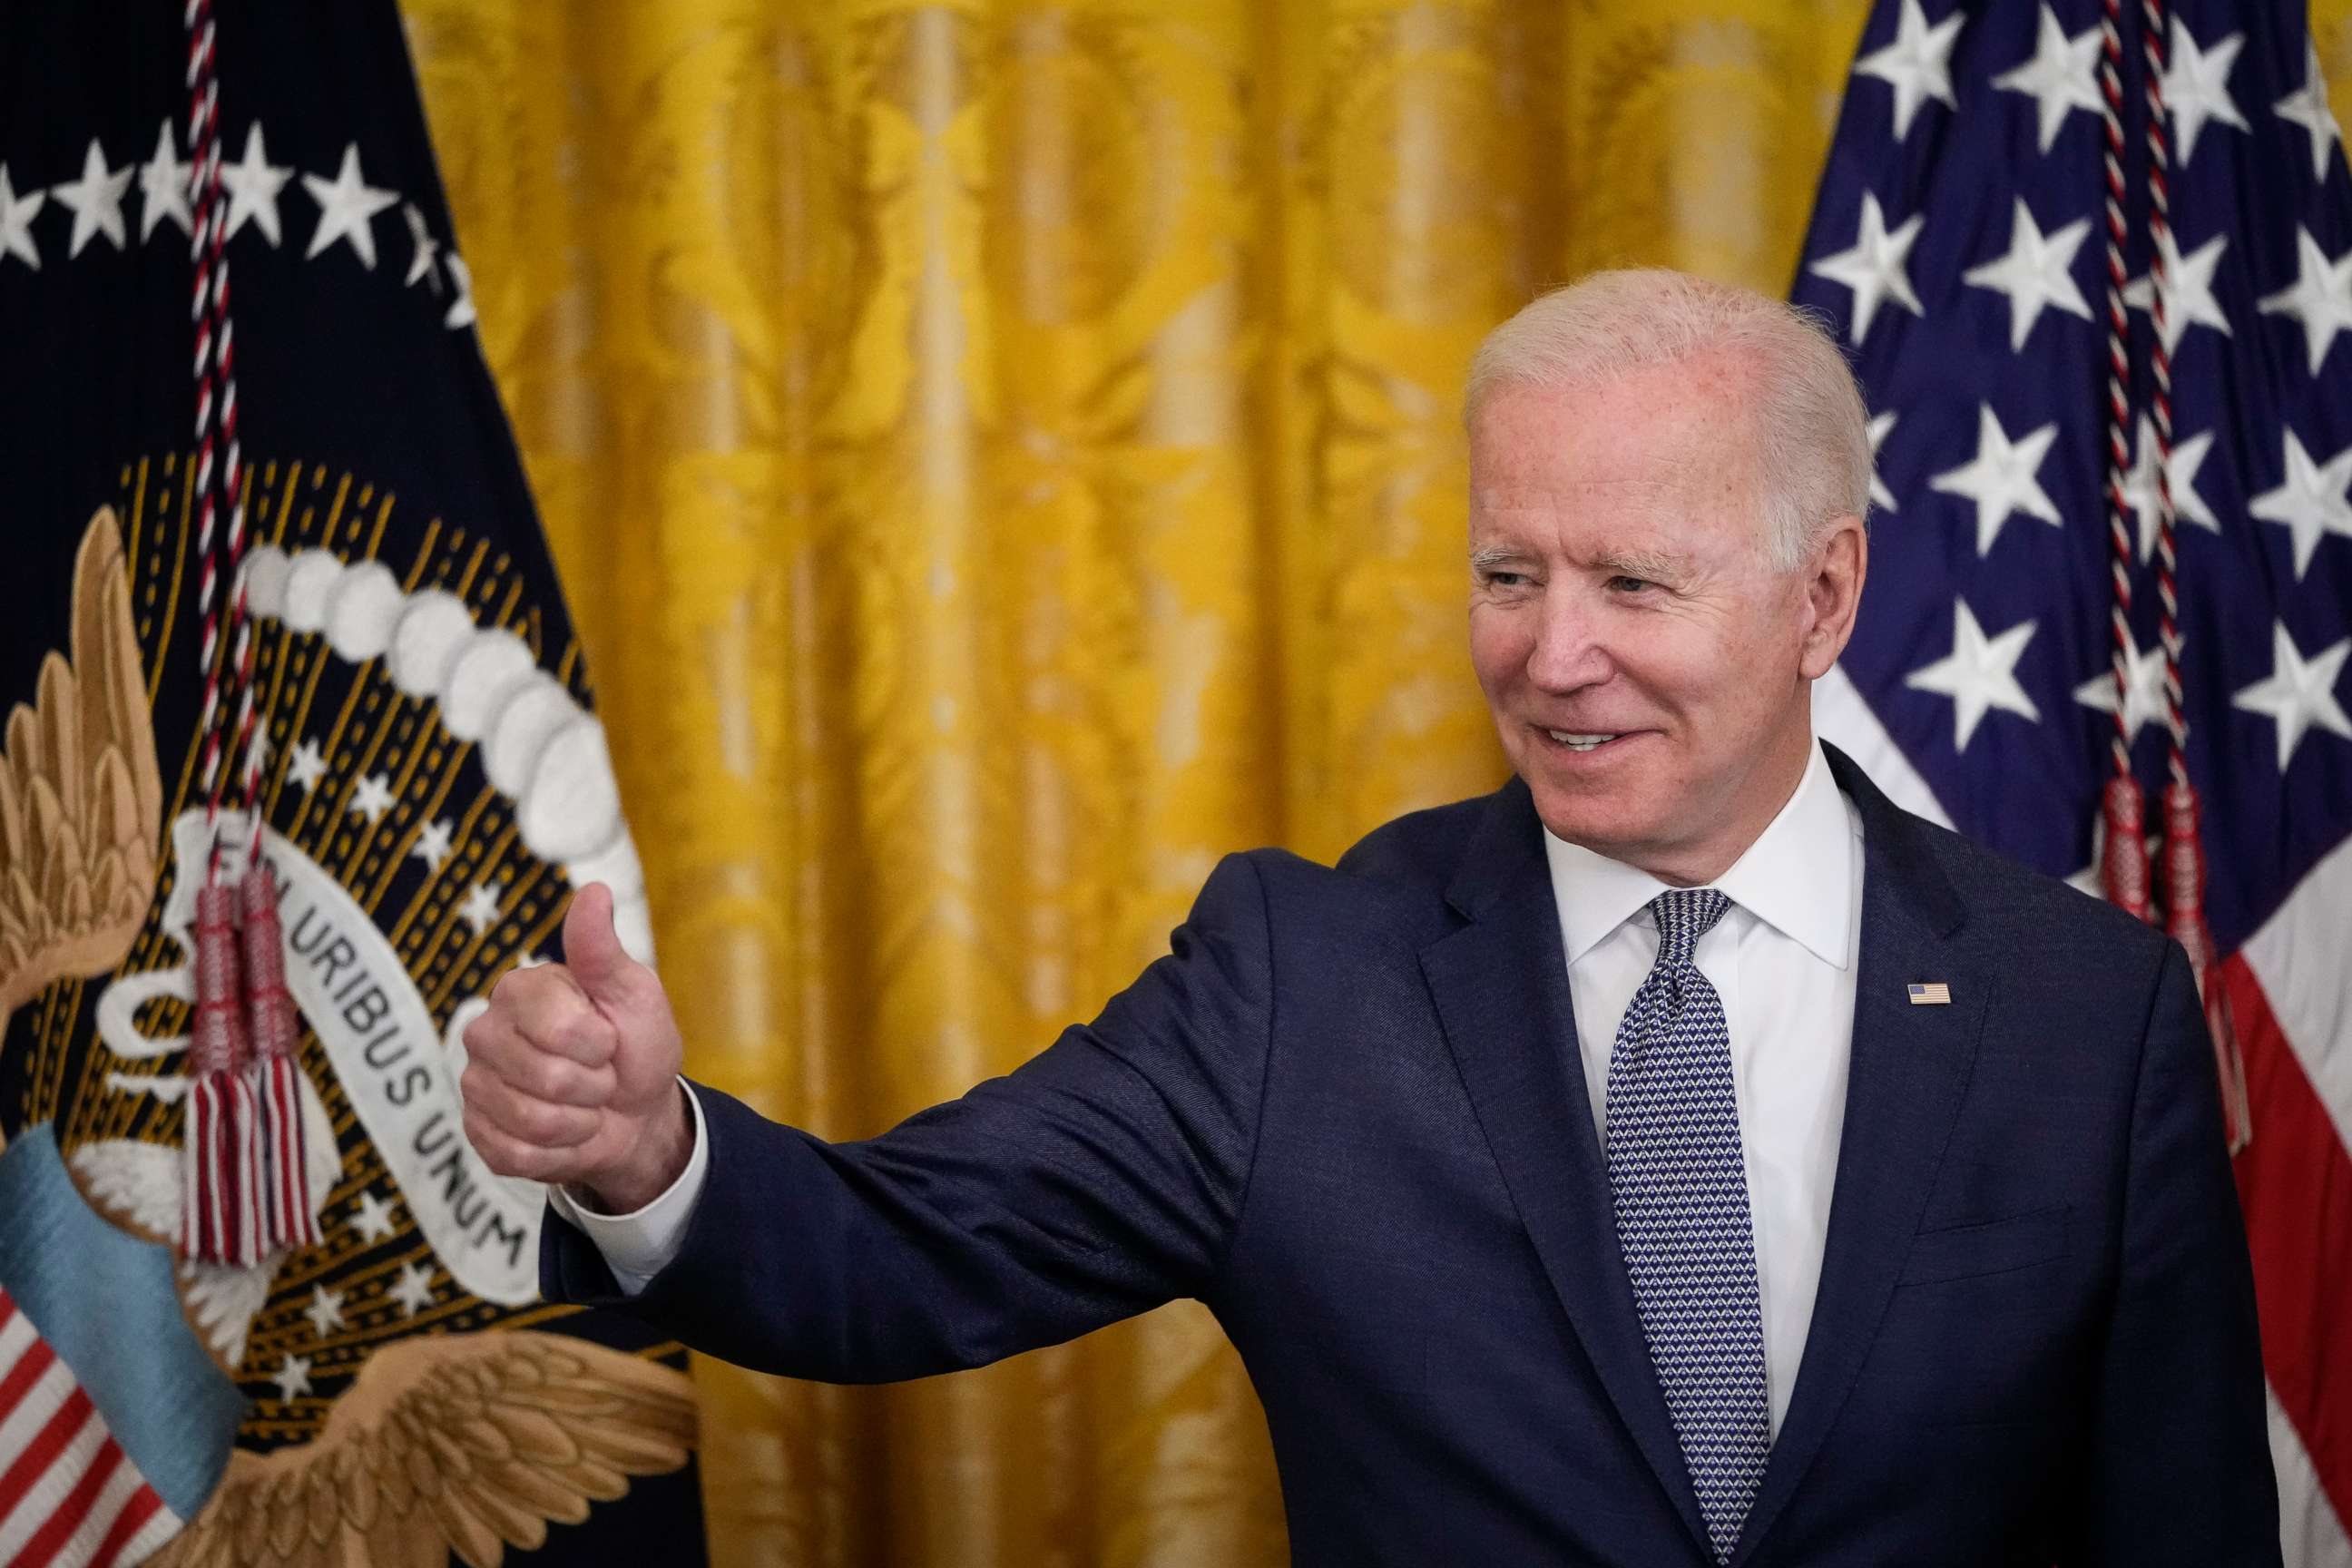 PHOTO: President Joe Biden gives the thumbs up to the audience before signing the Juneteenth National Independence Day Act into law at the White House on June 17, 2021.